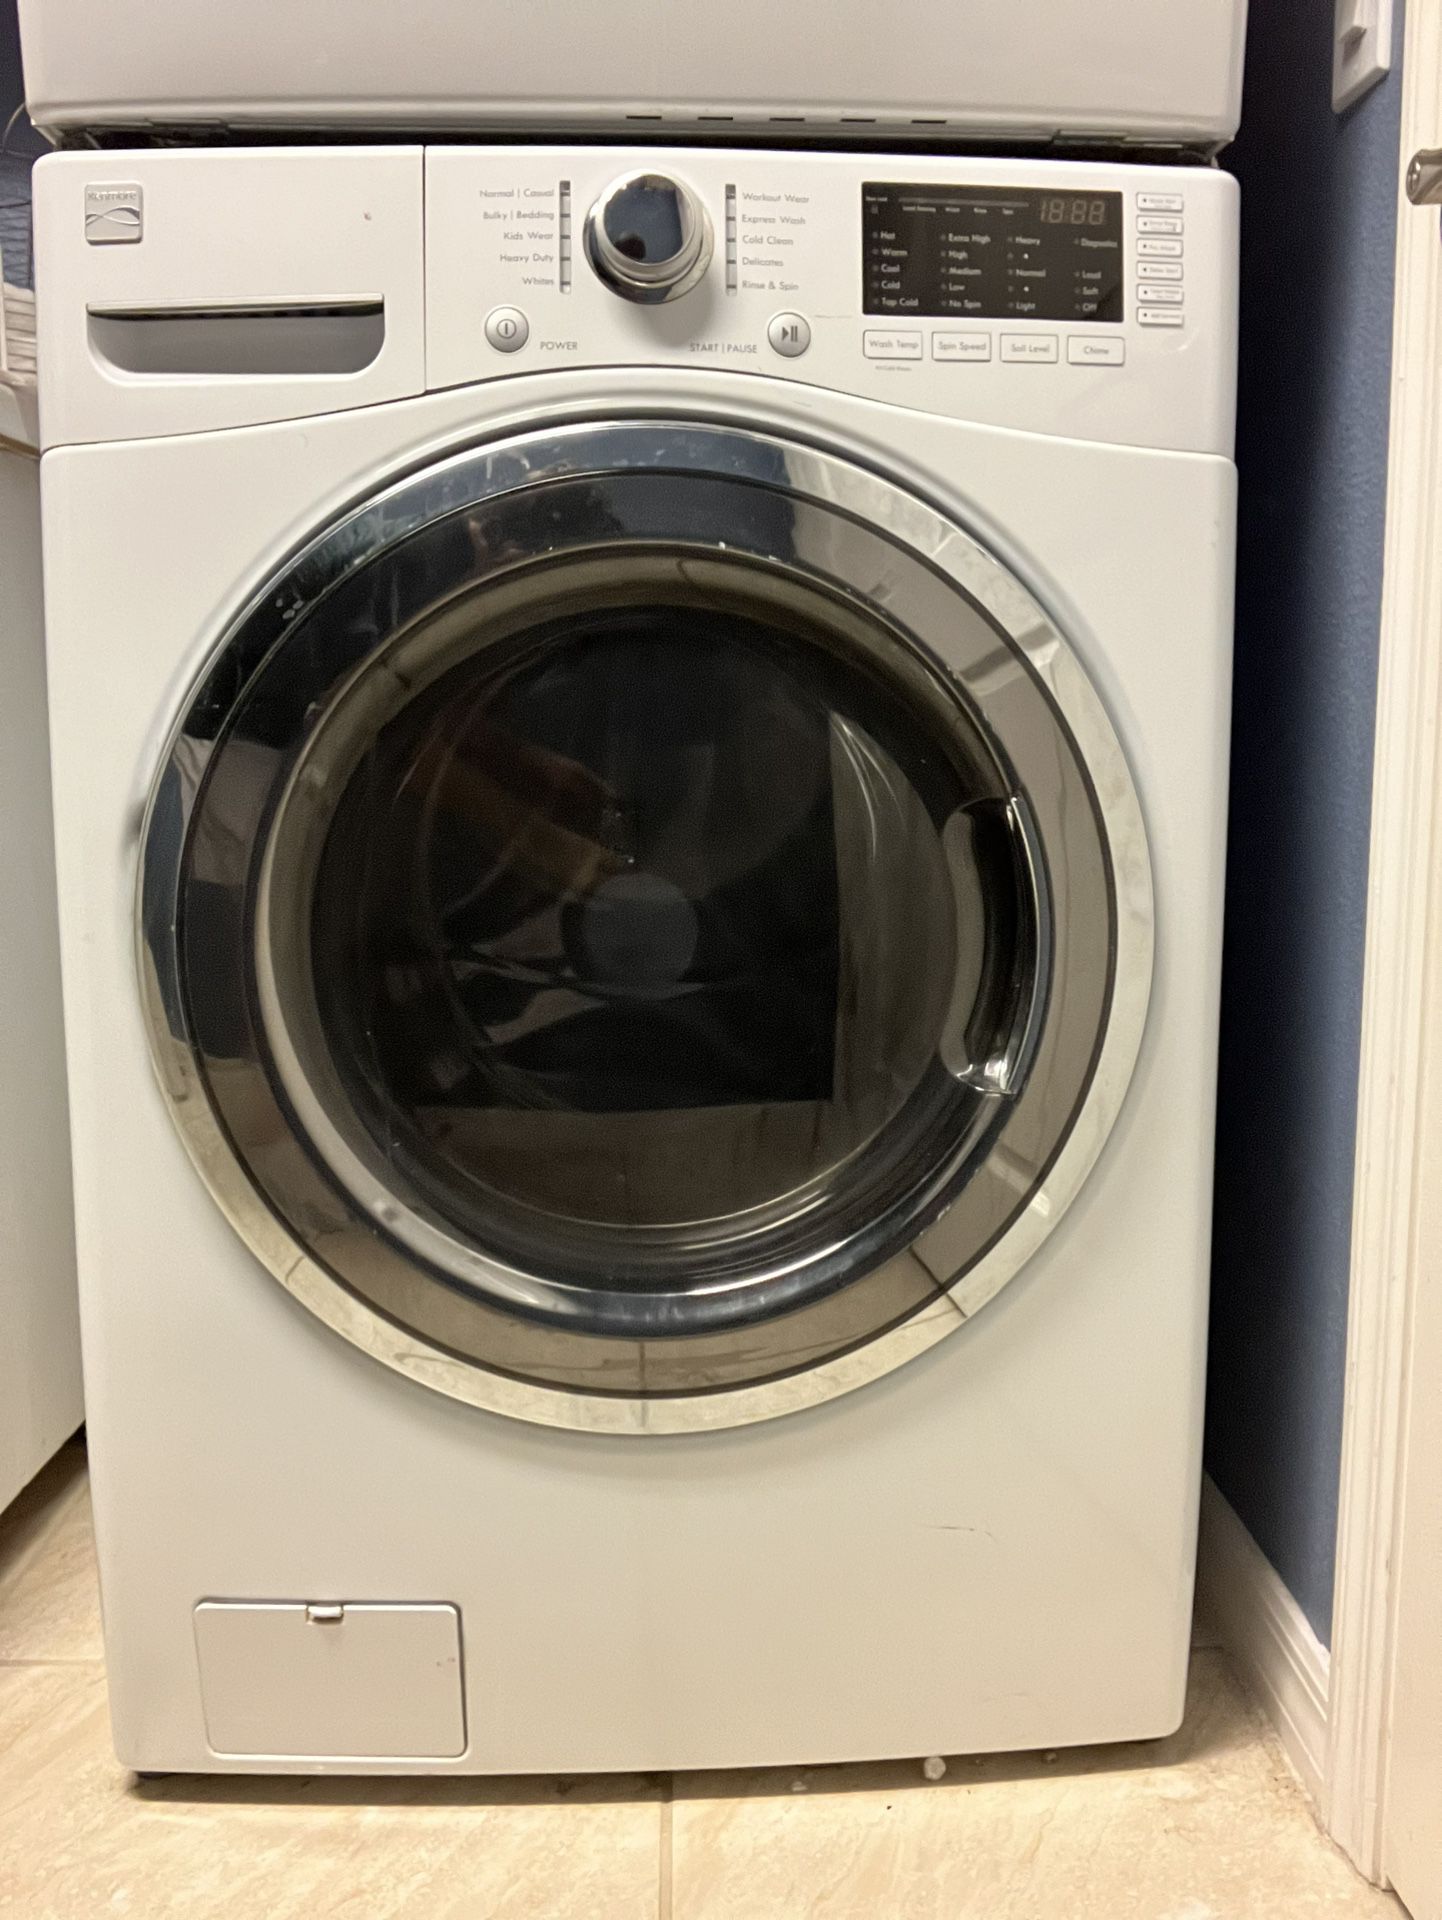 FREE - Broken Washer for PARTS or SCRAP